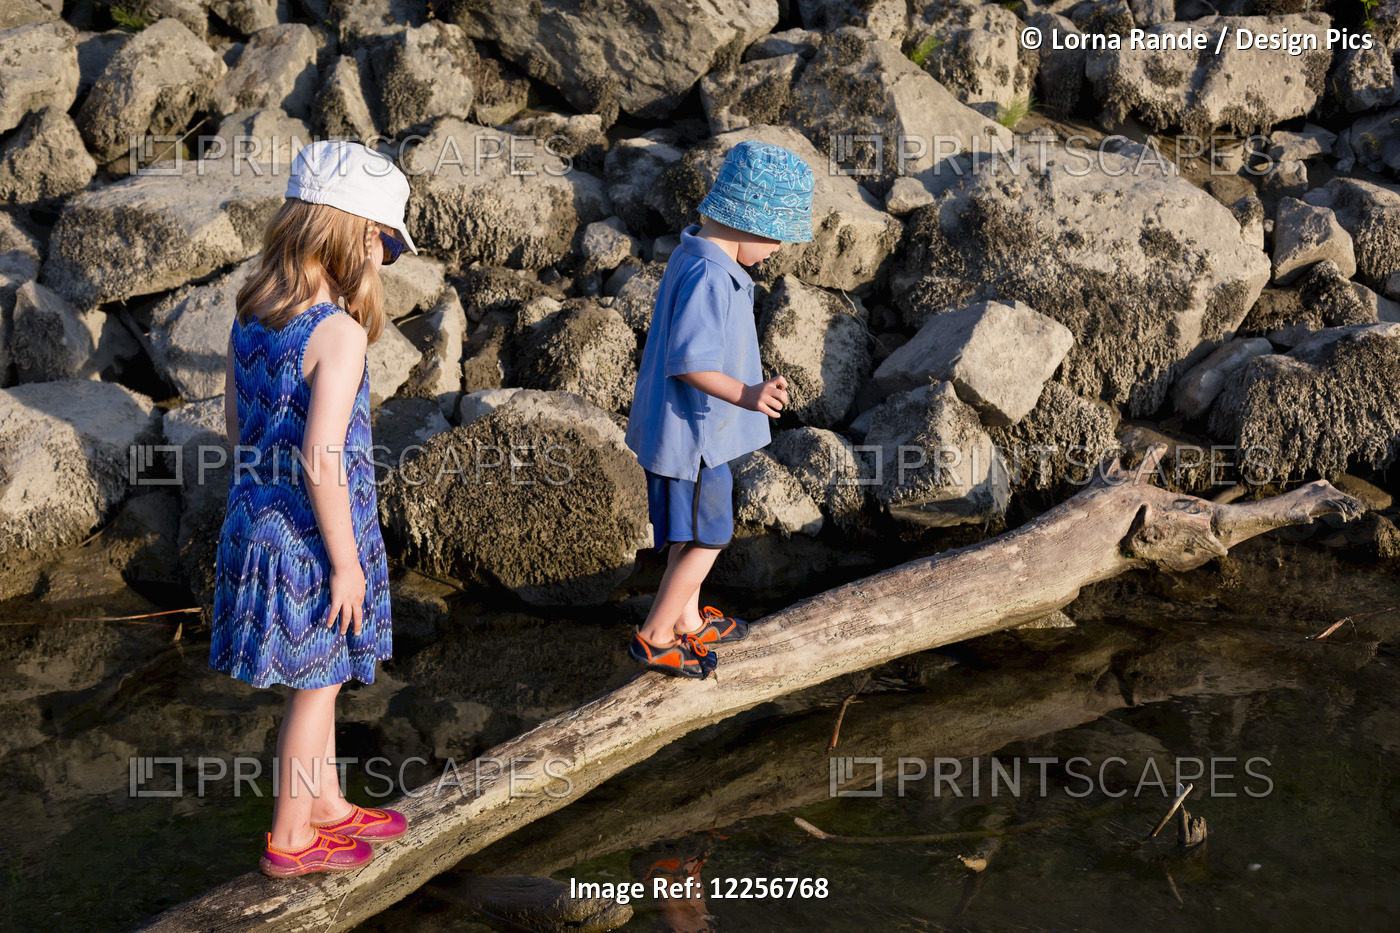 Children Walking On A Log Over The Water; Chilliwack, British Columbia, Canada